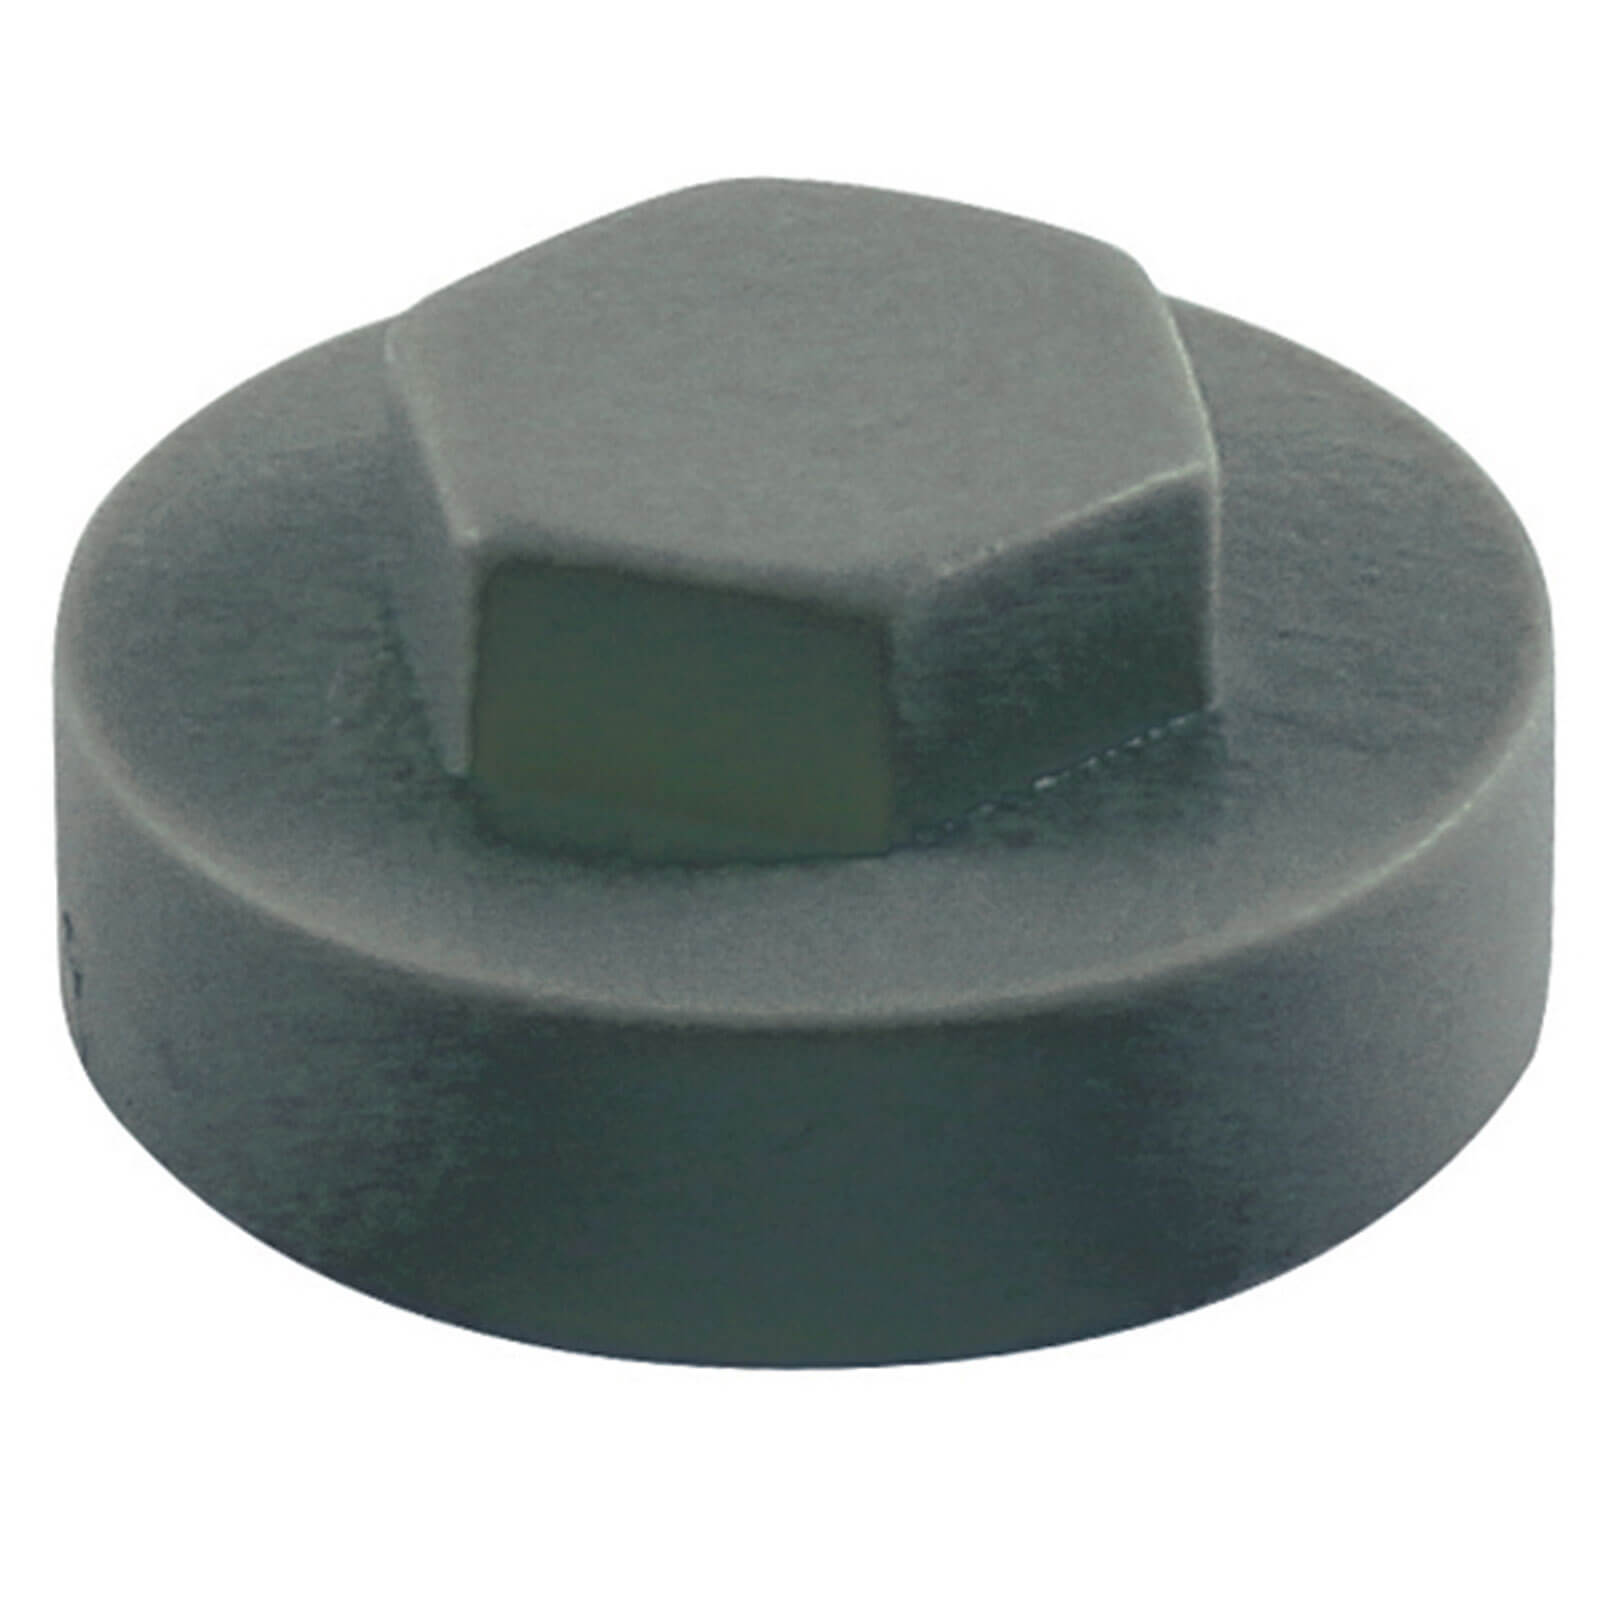 Image of Colour Match Hexagon Screw Cover Cap 5/16" x 19mm Raven Slate Pack of 1000